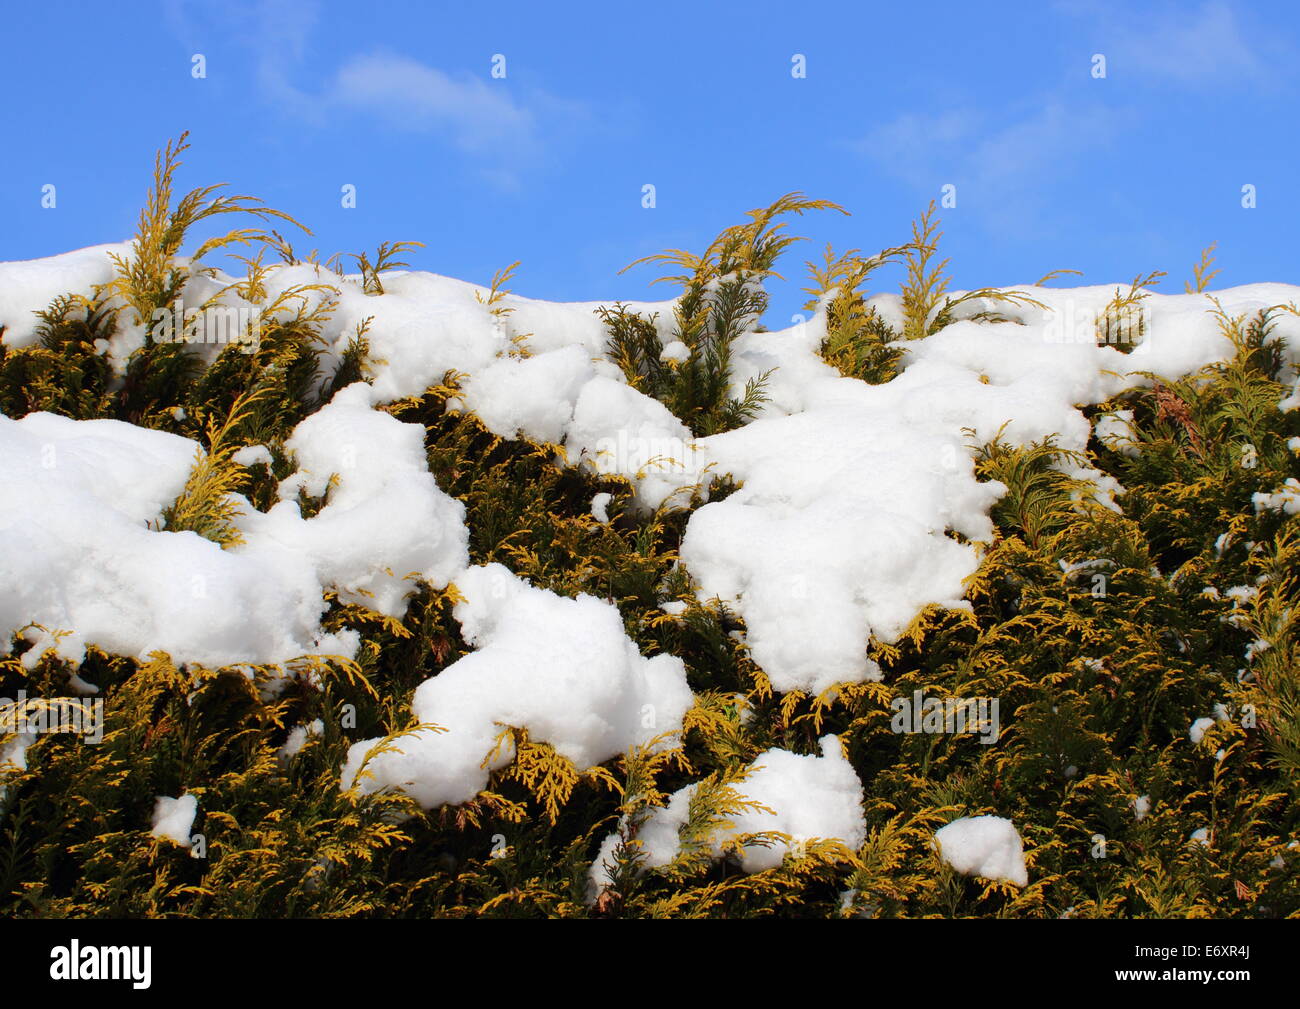 Evergreen thuja hedge background with snow and sky Stock Photo